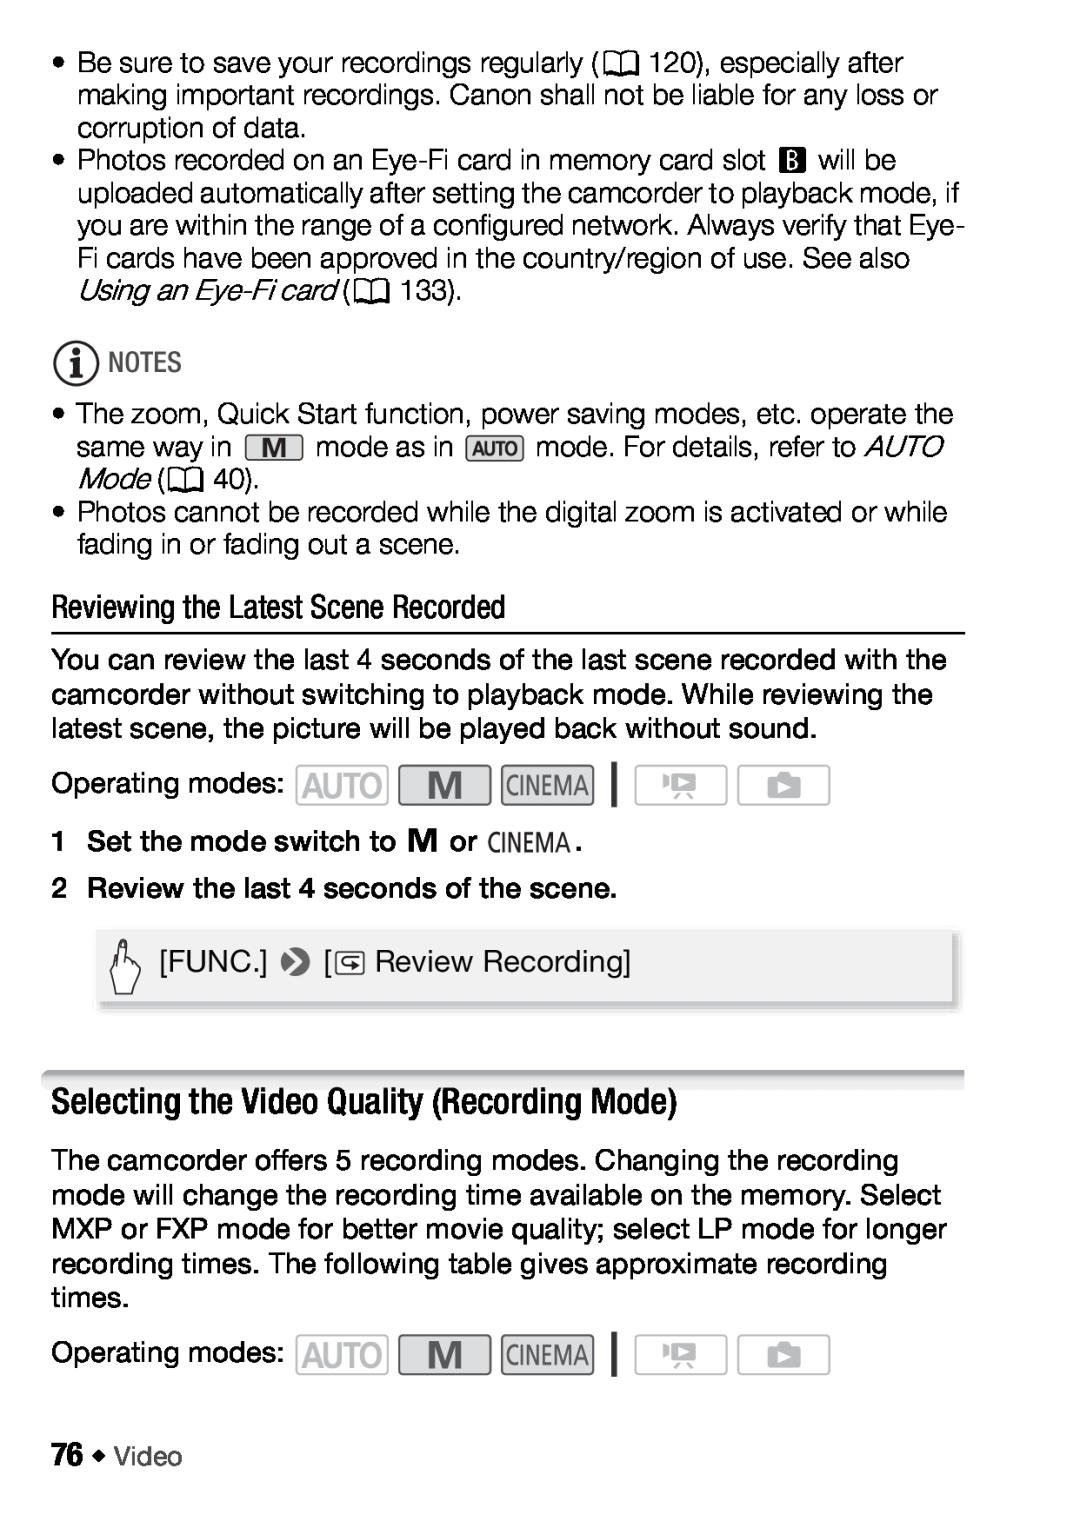 Canon HFM406, HFM46 instruction manual Selecting the Video Quality Recording Mode, Reviewing the Latest Scene Recorded 